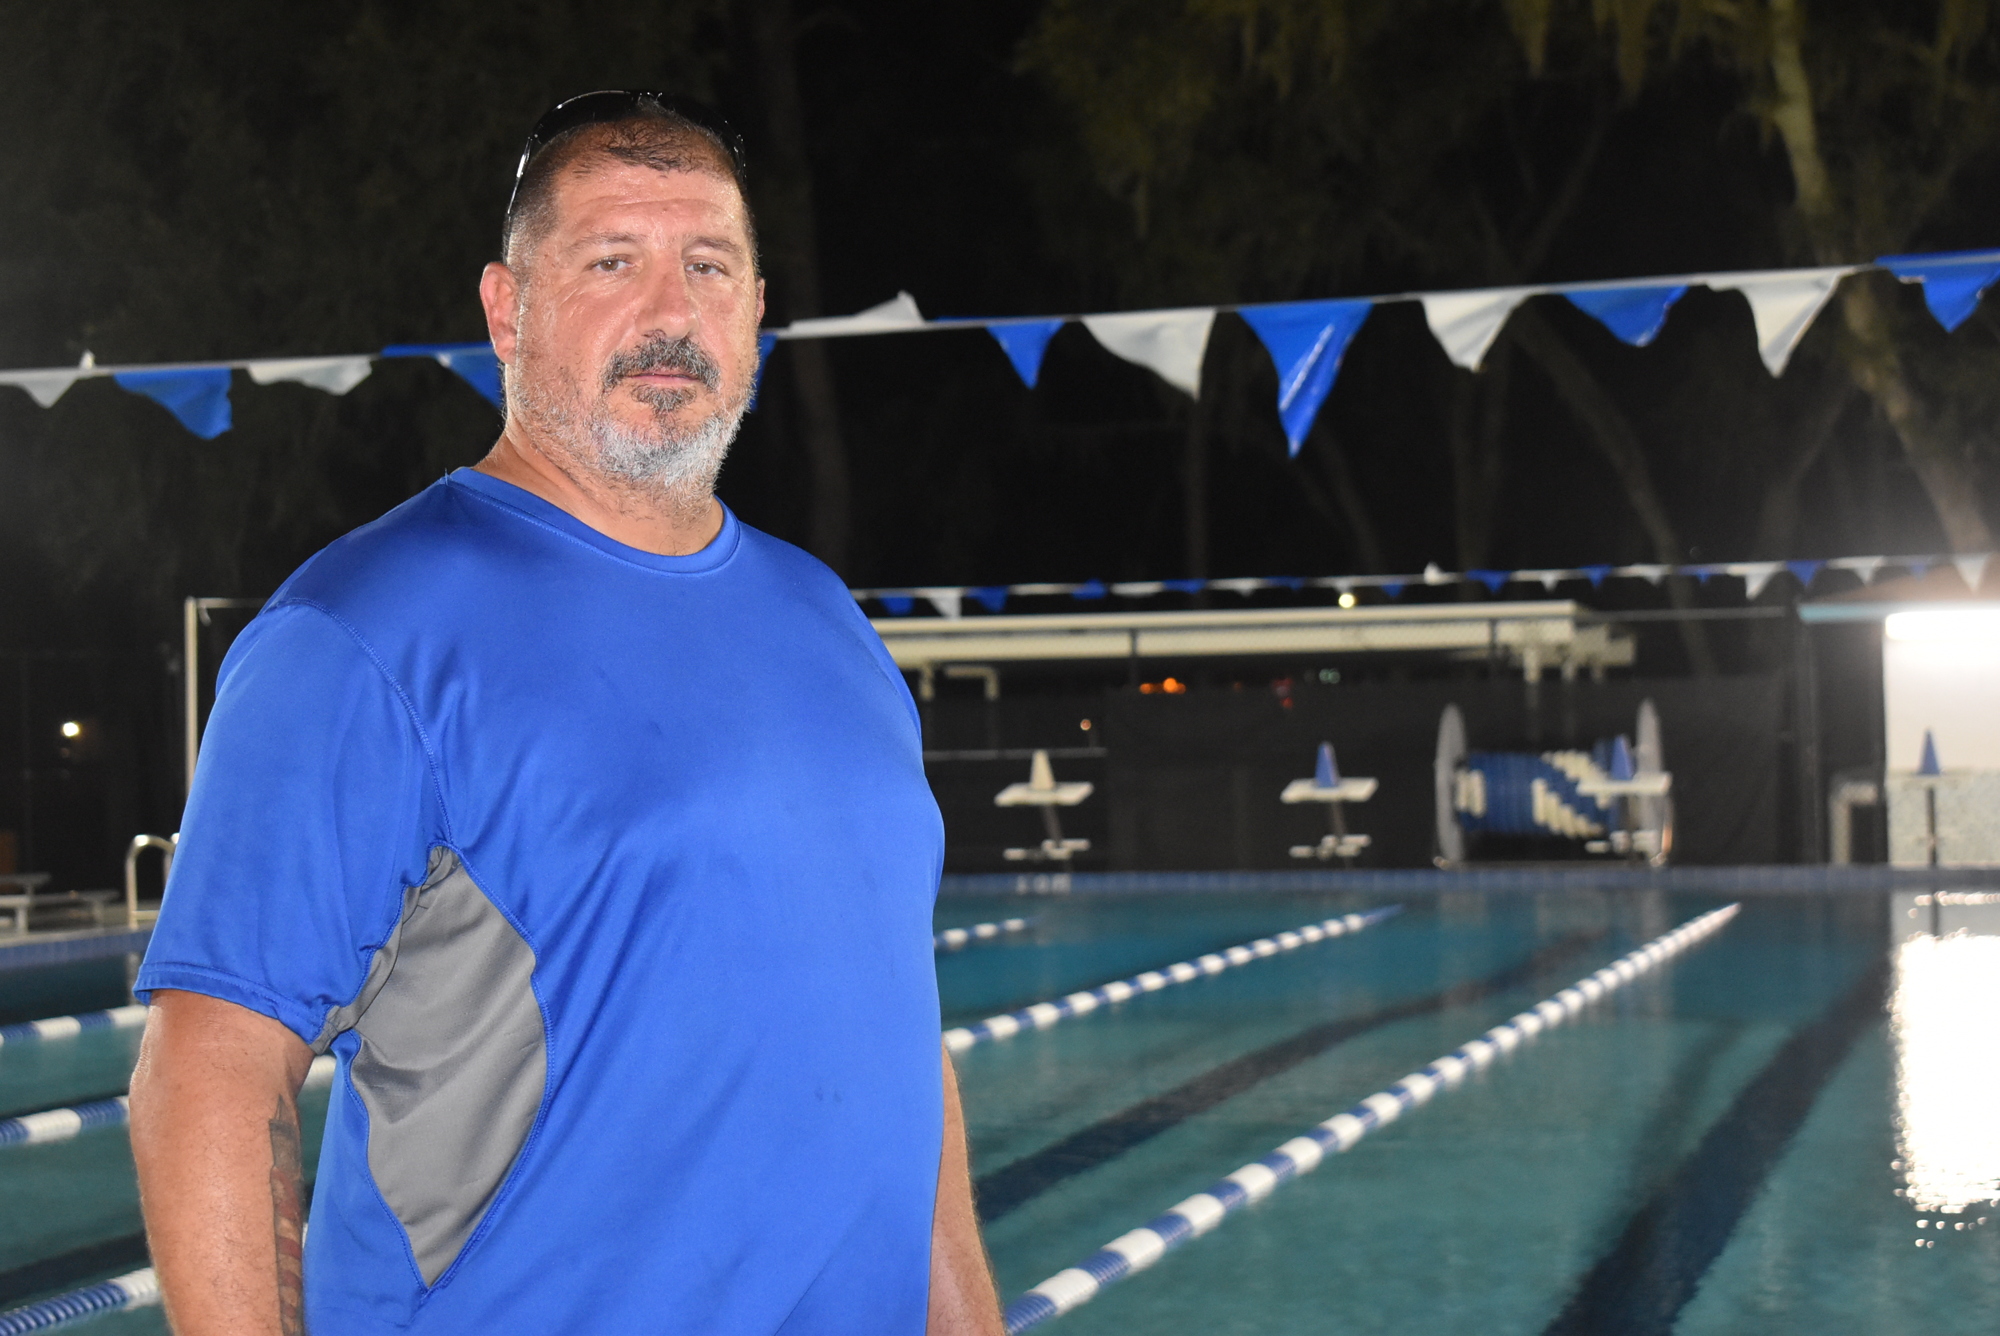 Lightning coach Steve Lubrino emailed Manatee County on Oct. 7 to request time for his team at John Marble Pool.